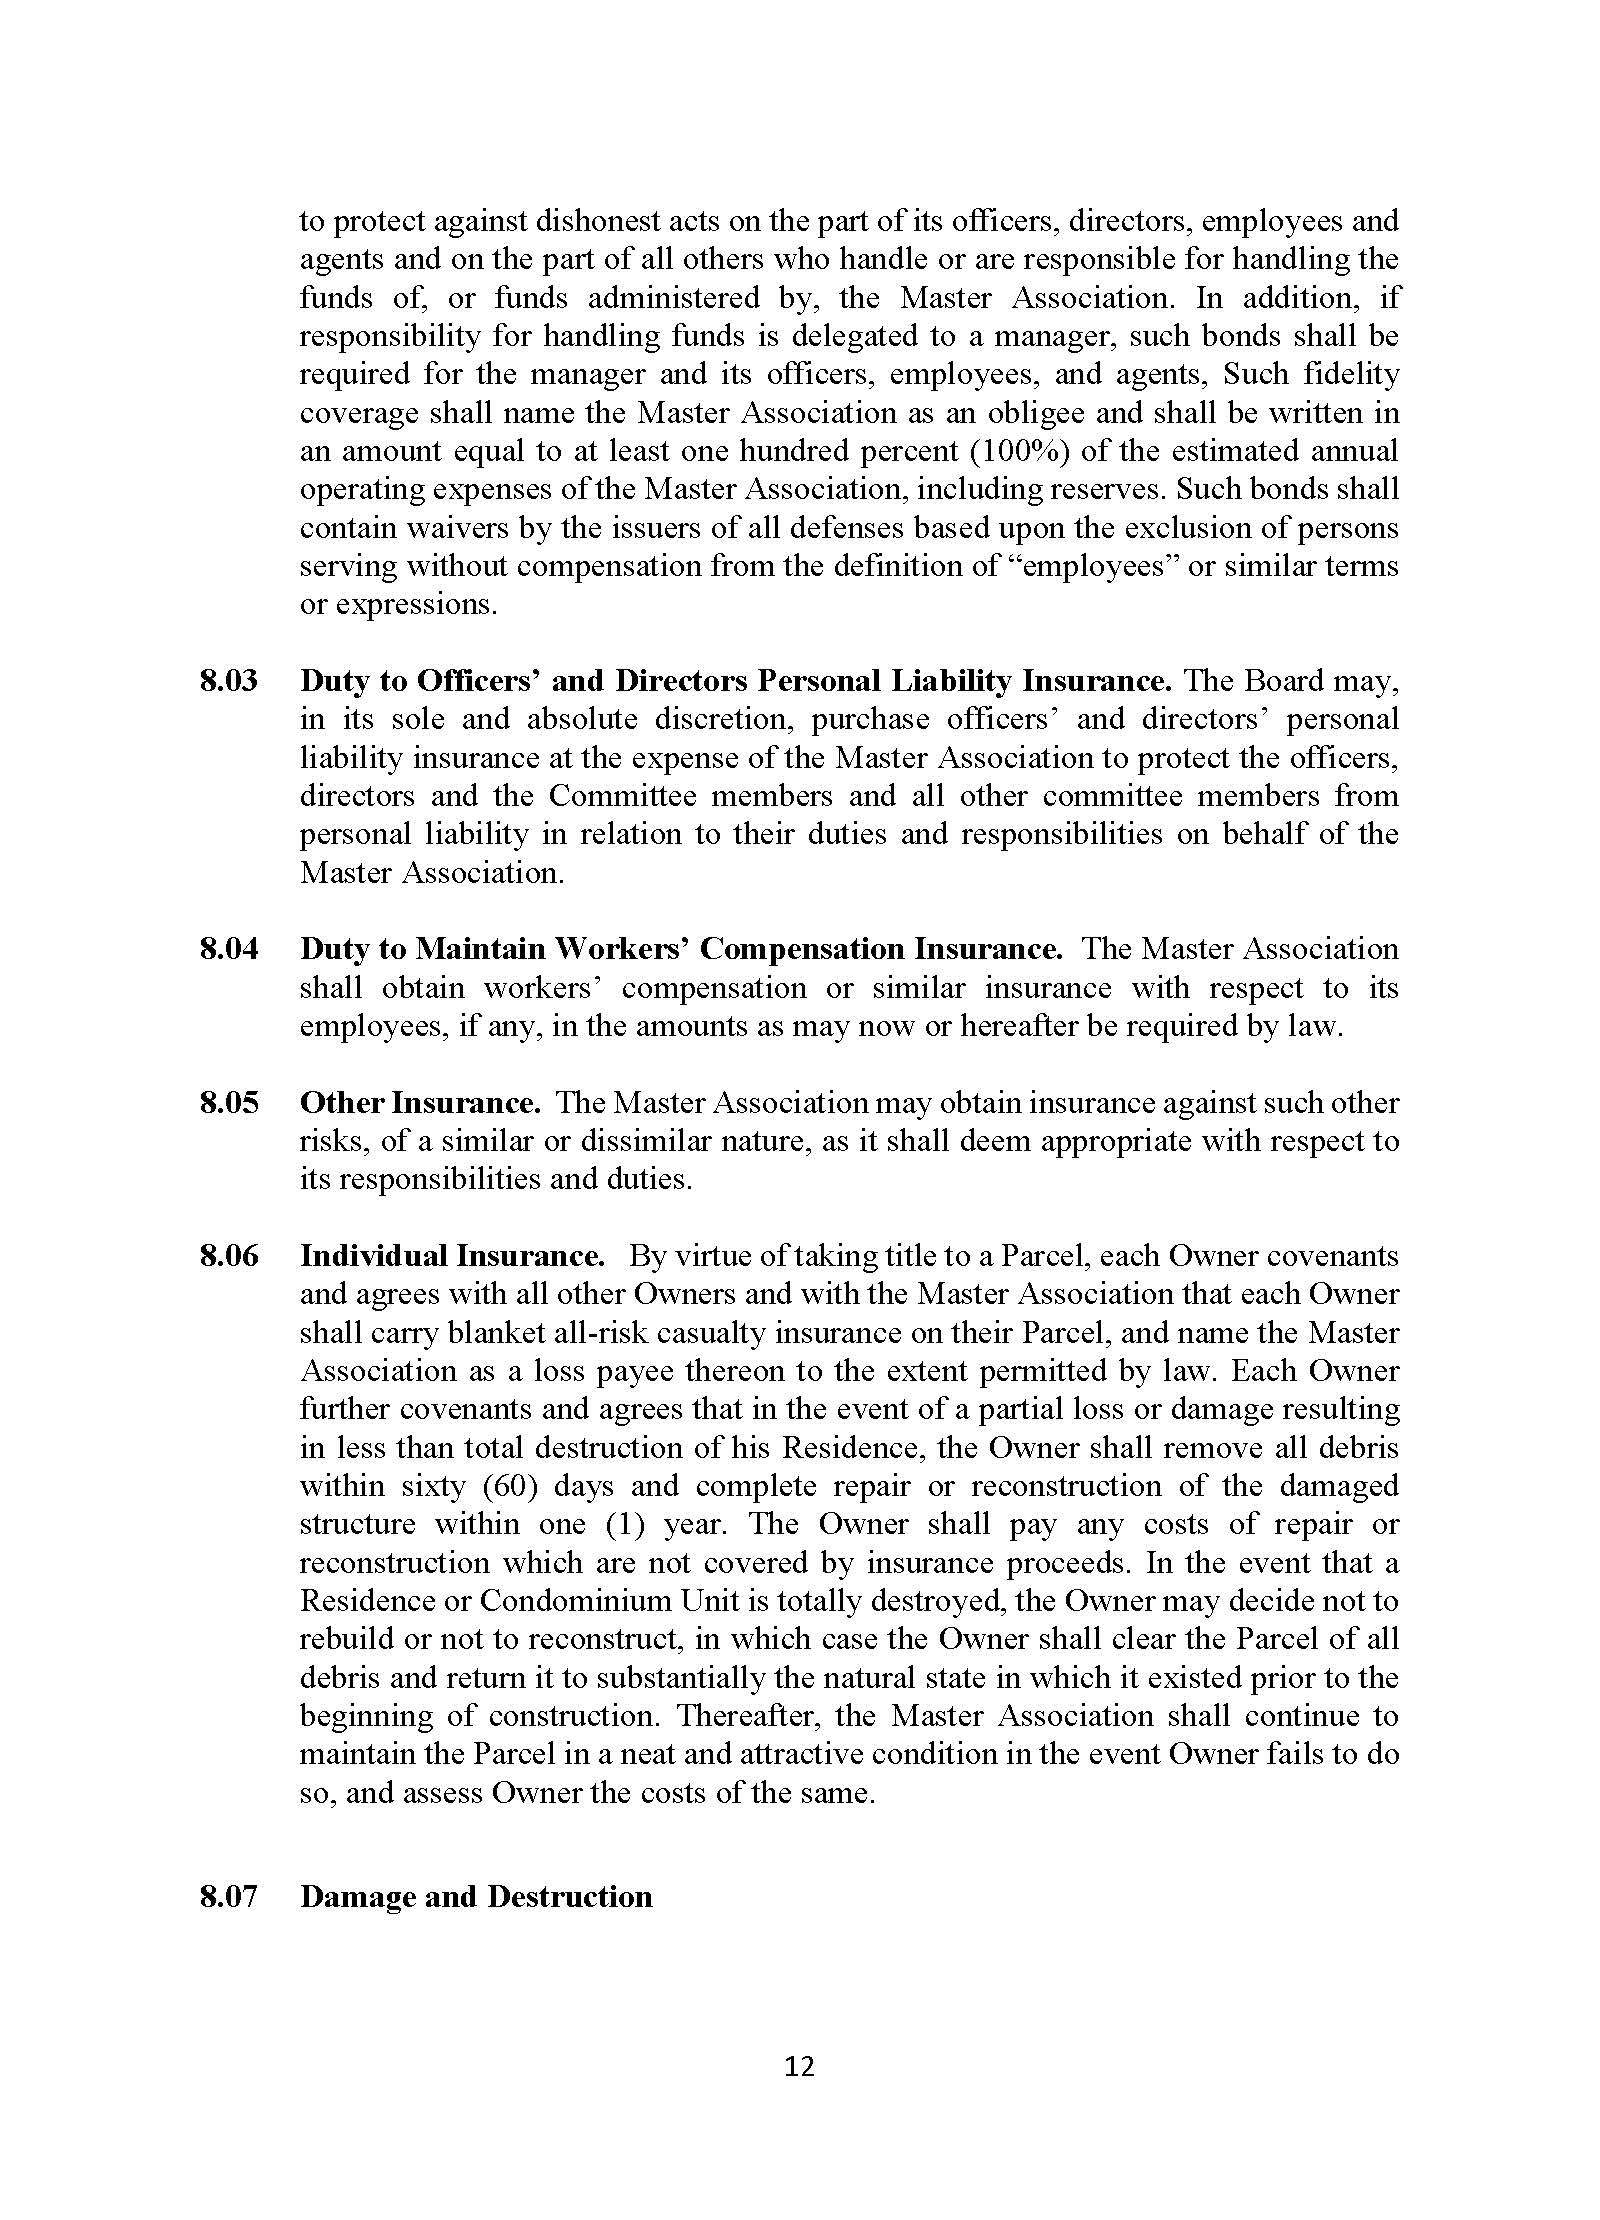 Article 8.X Page 12